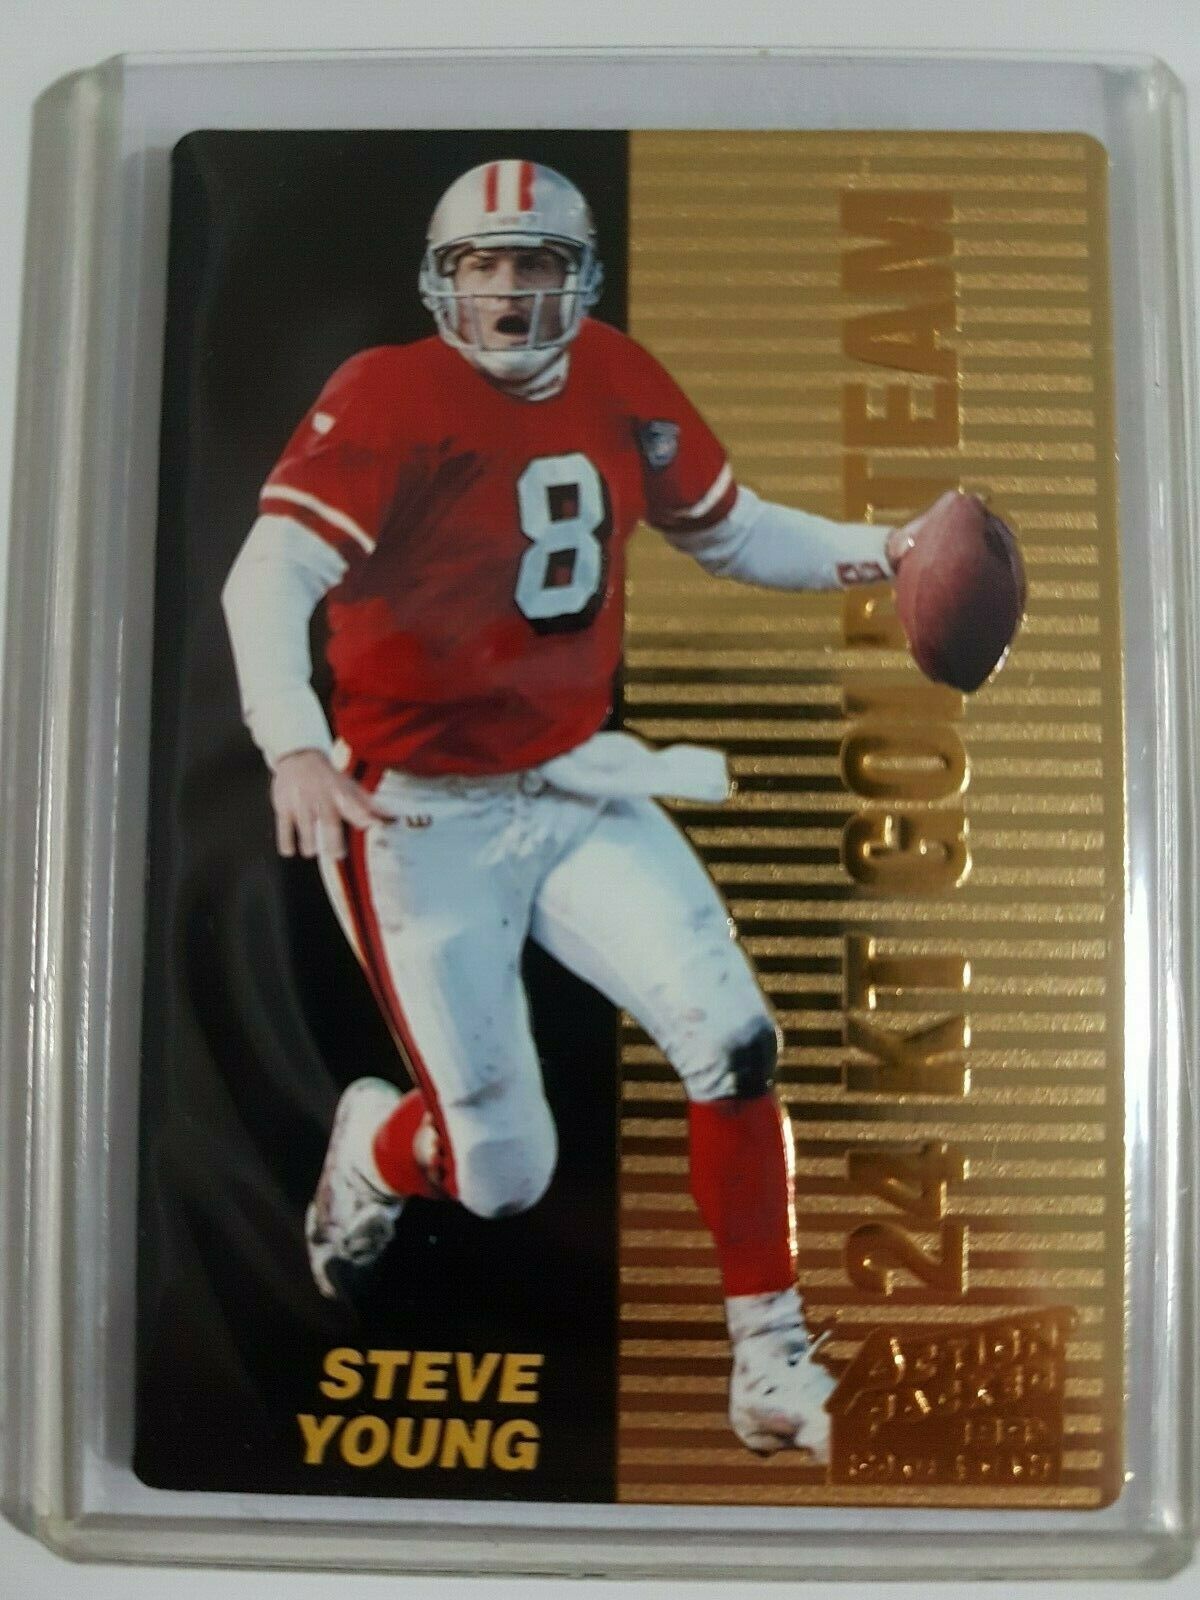 Steve Young - 1995 Action Packed Rookies/Stars 24KT GOLD TEAM #1 (49ers)